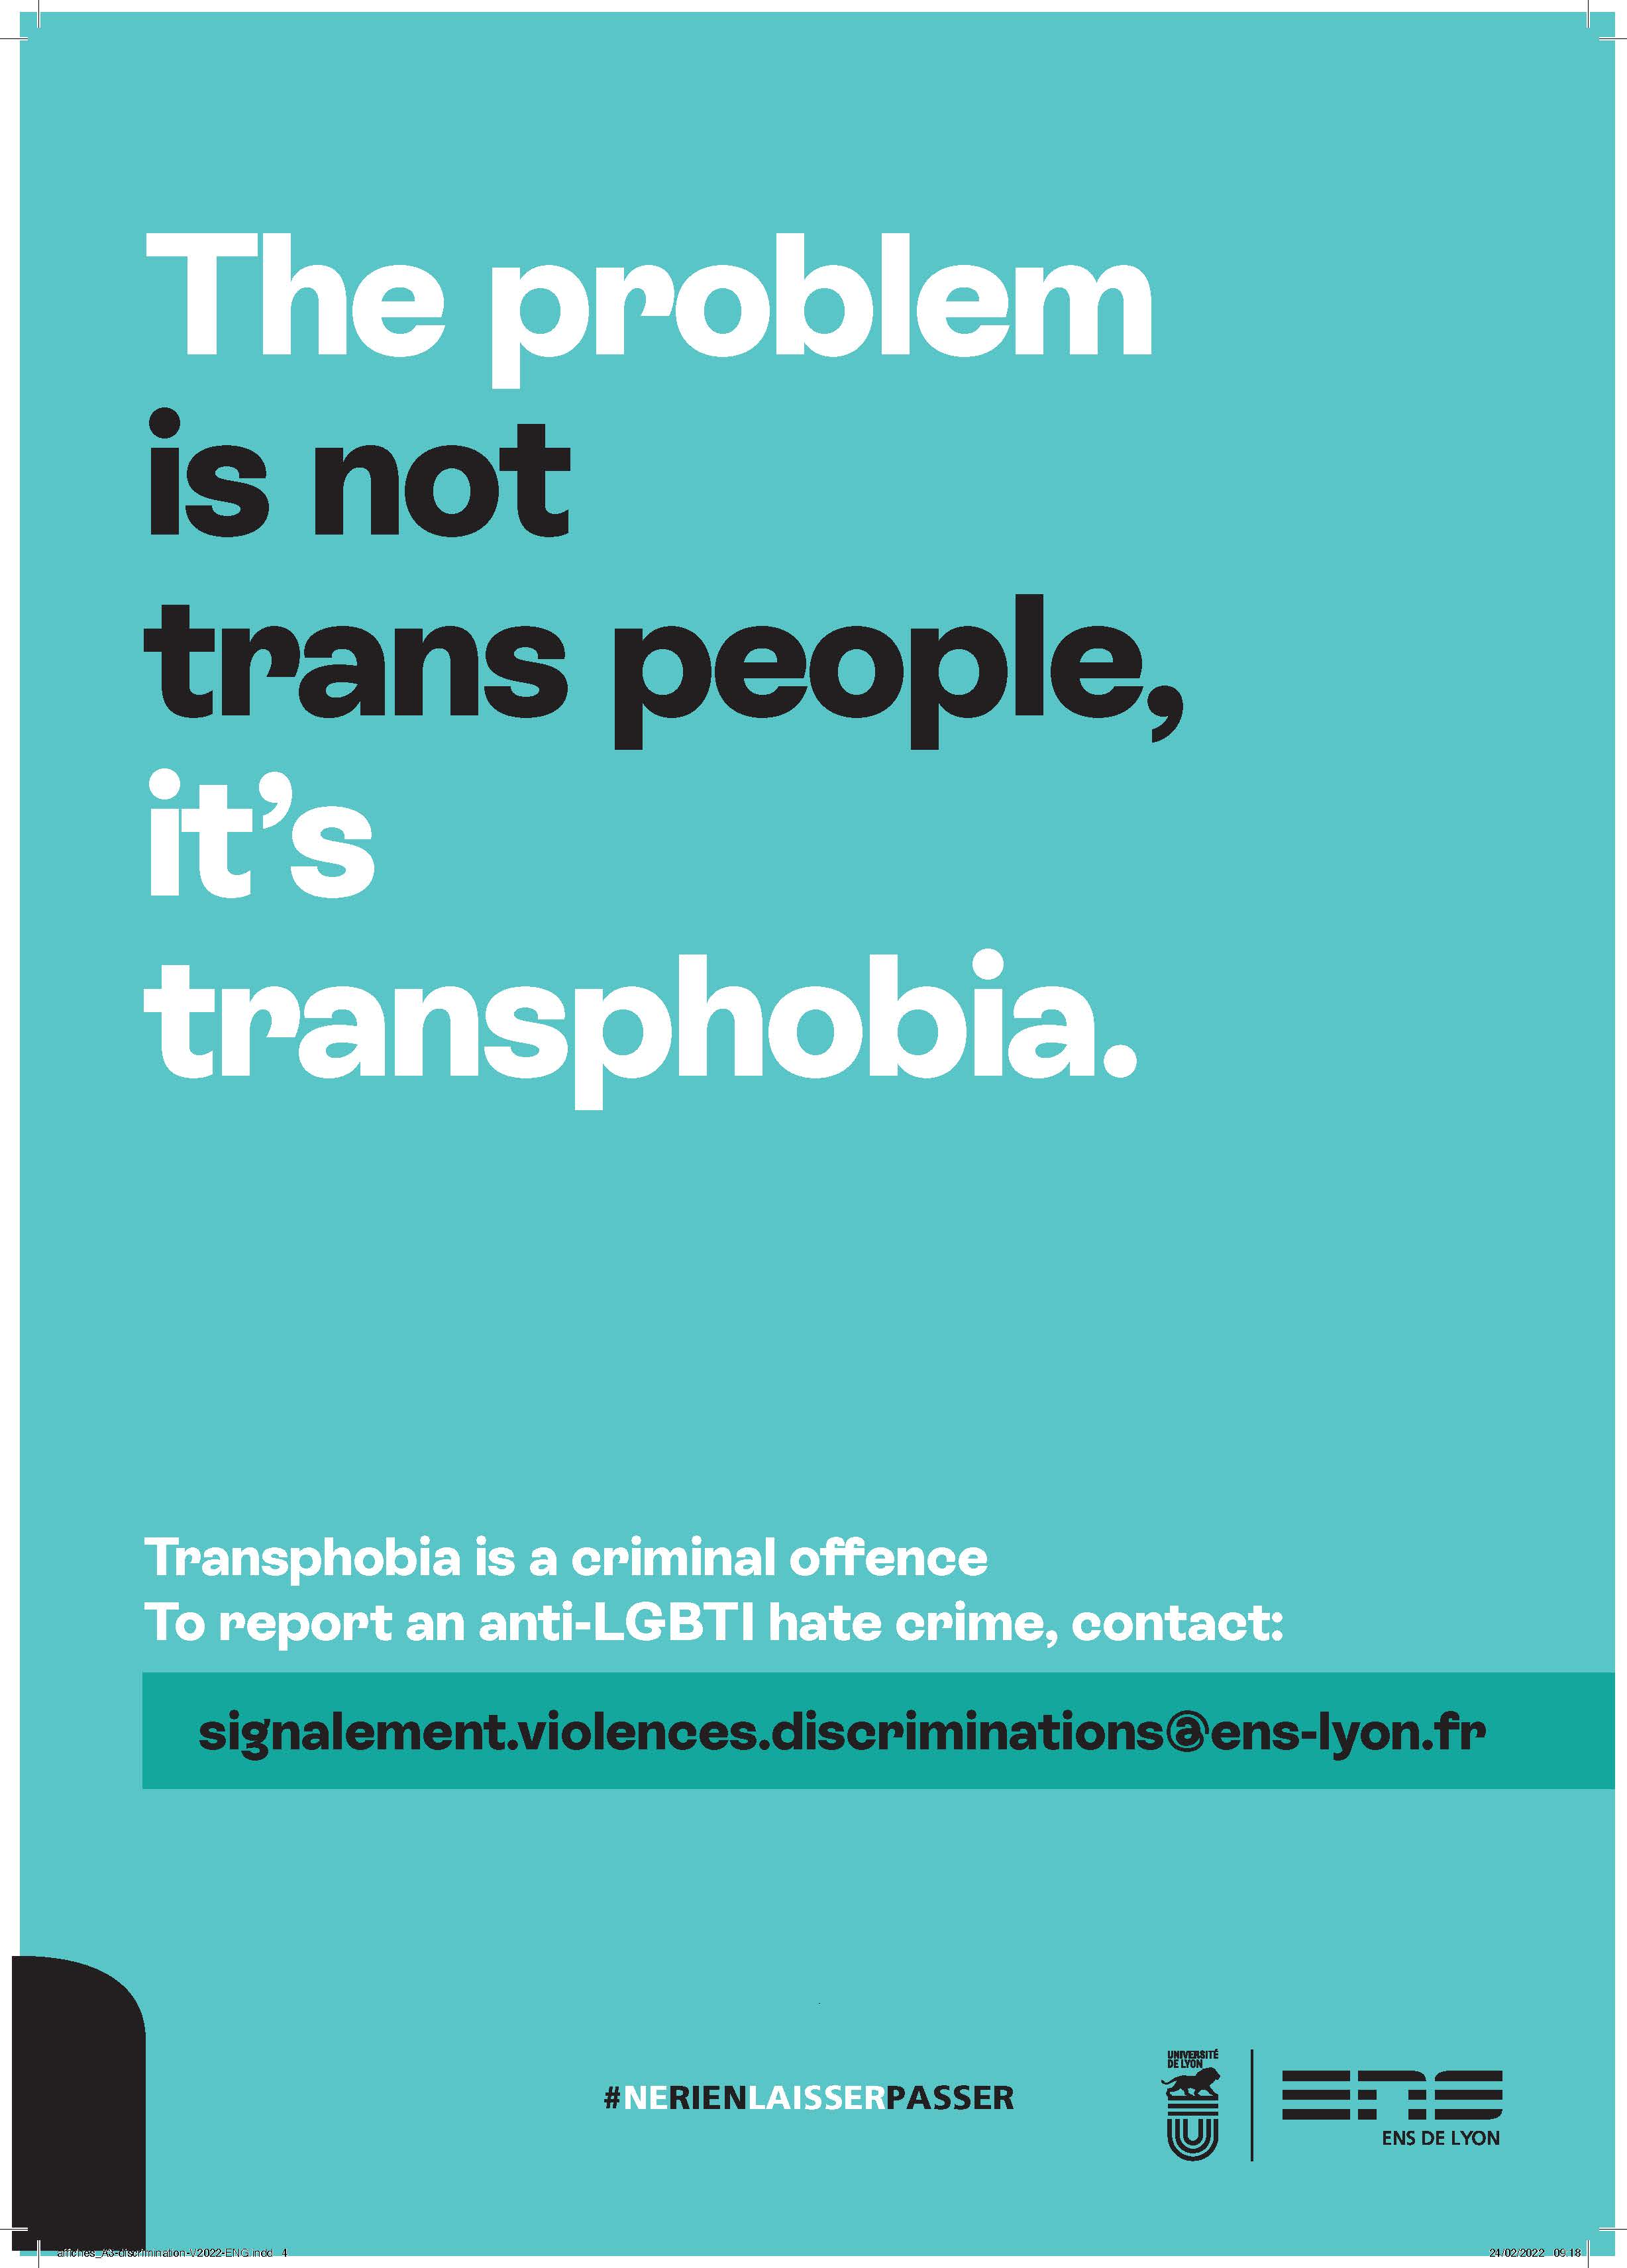 The problem is not trans people, it's transphobia